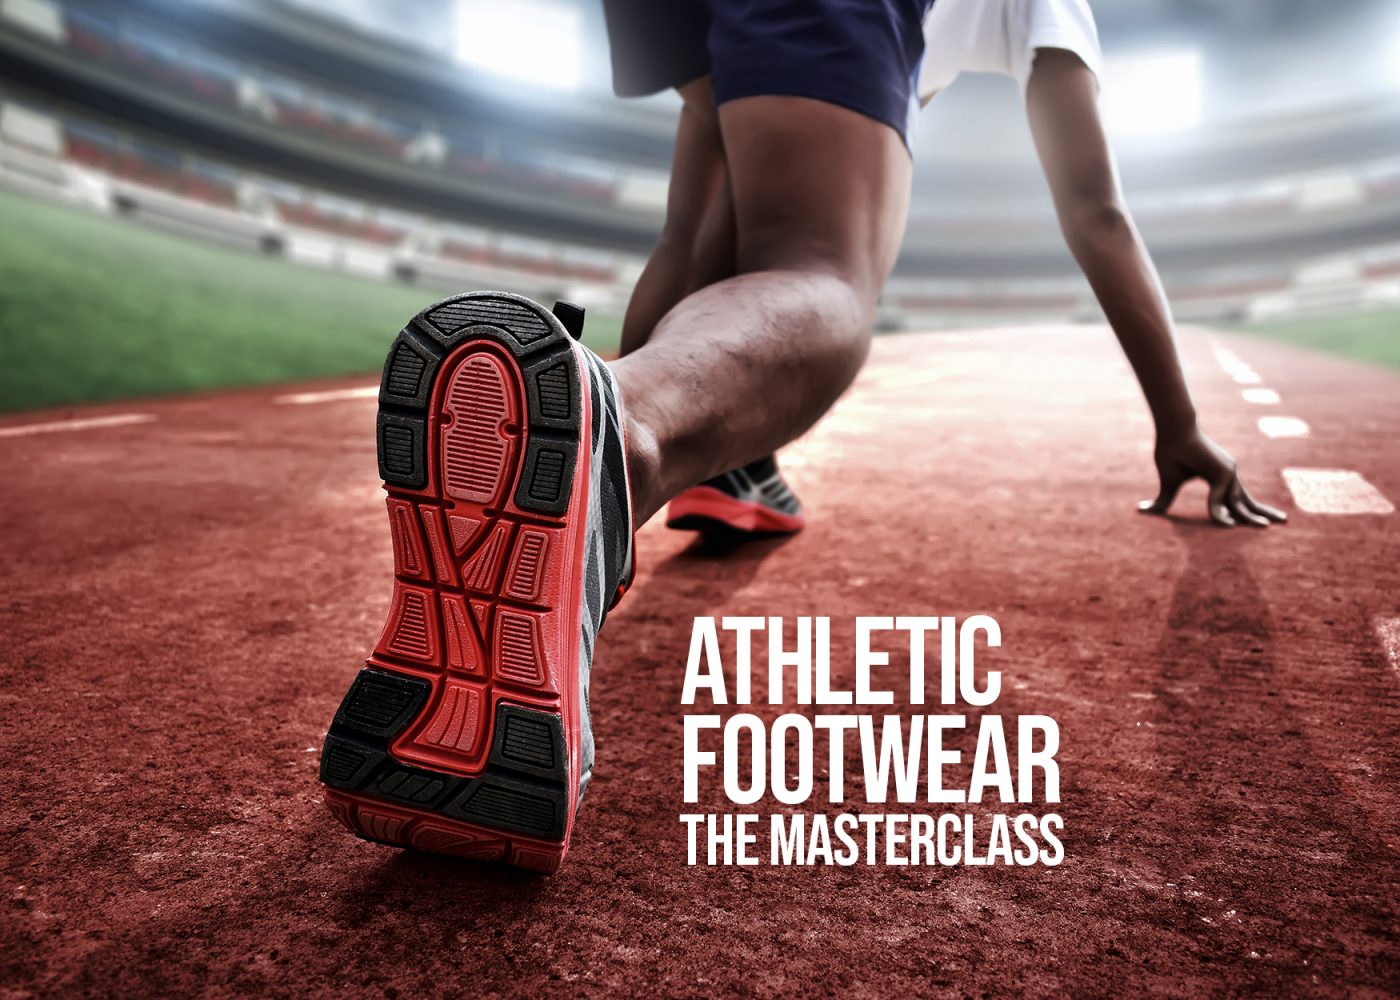 https://www.bartoldclinical.com/wp-content/uploads/2020/11/athletic-footware-masterclass-cover-e1625824246522.jpg